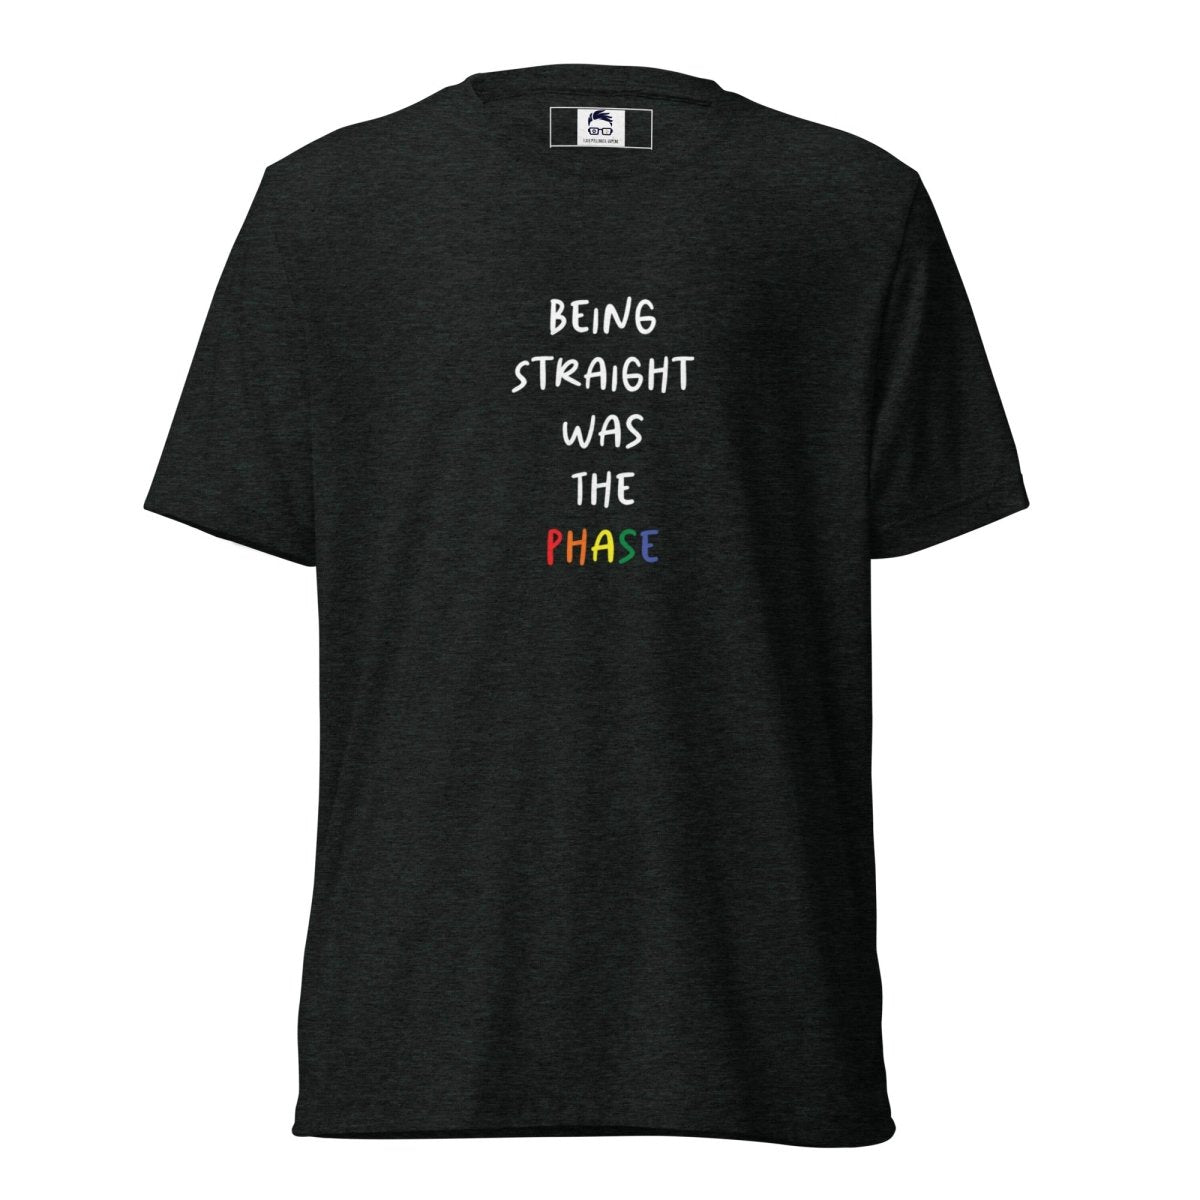 Being Straight Was the Phase Short sleeve t-shirt3P's Inclusive Beauty